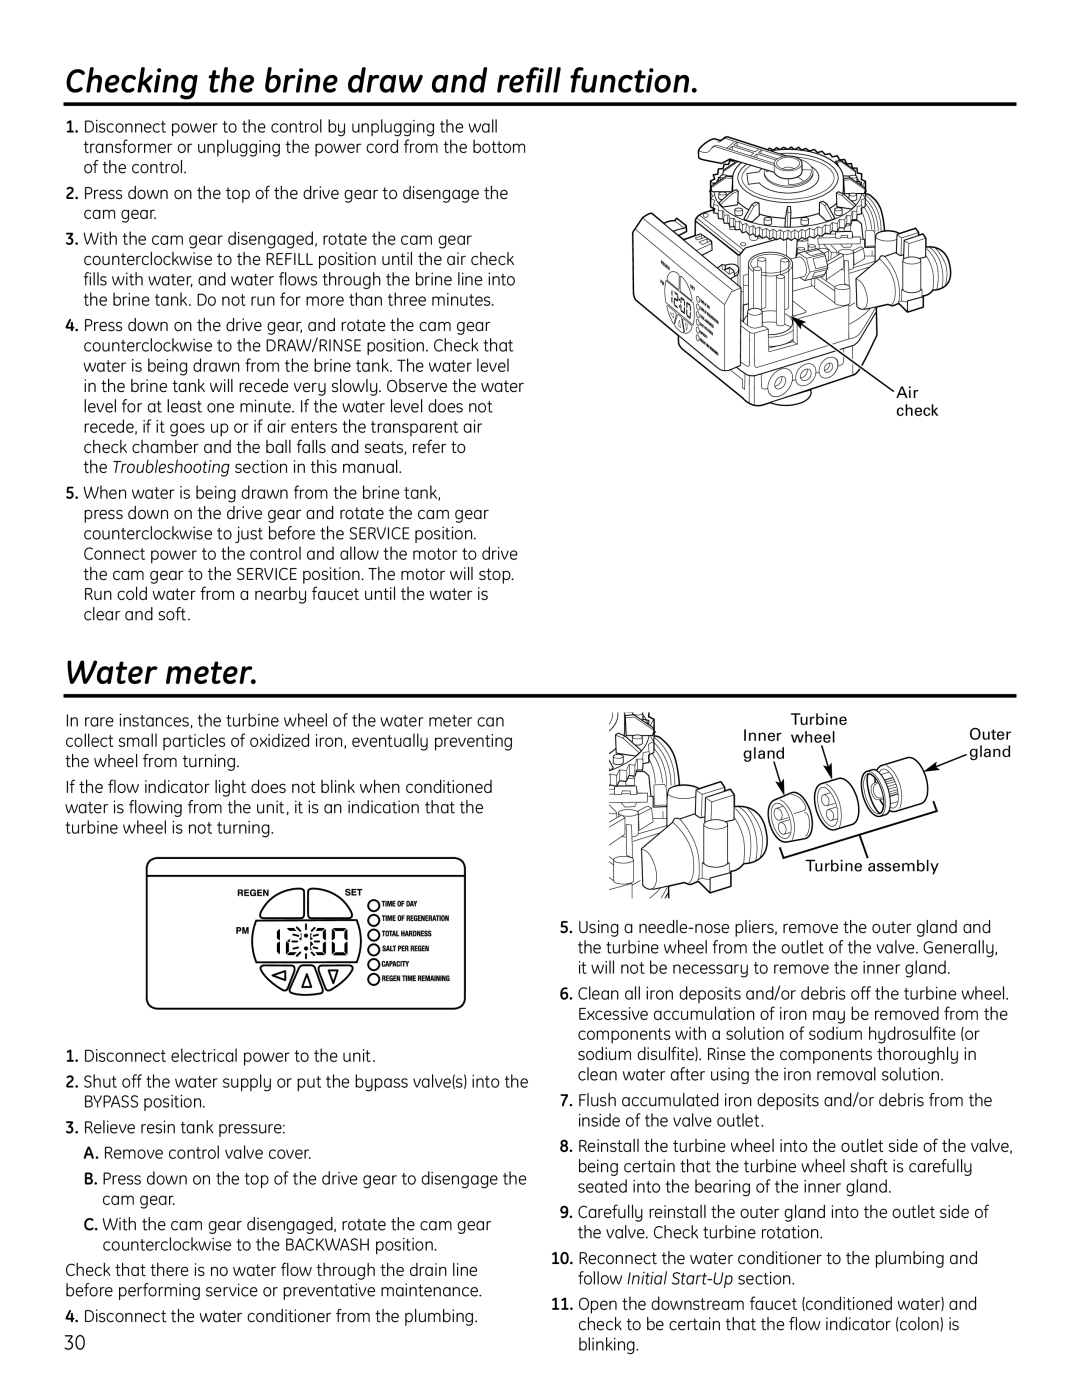 GE GNPR48L, GNPR40L installation instructions Checking the brine draw and refill function, Water meter 